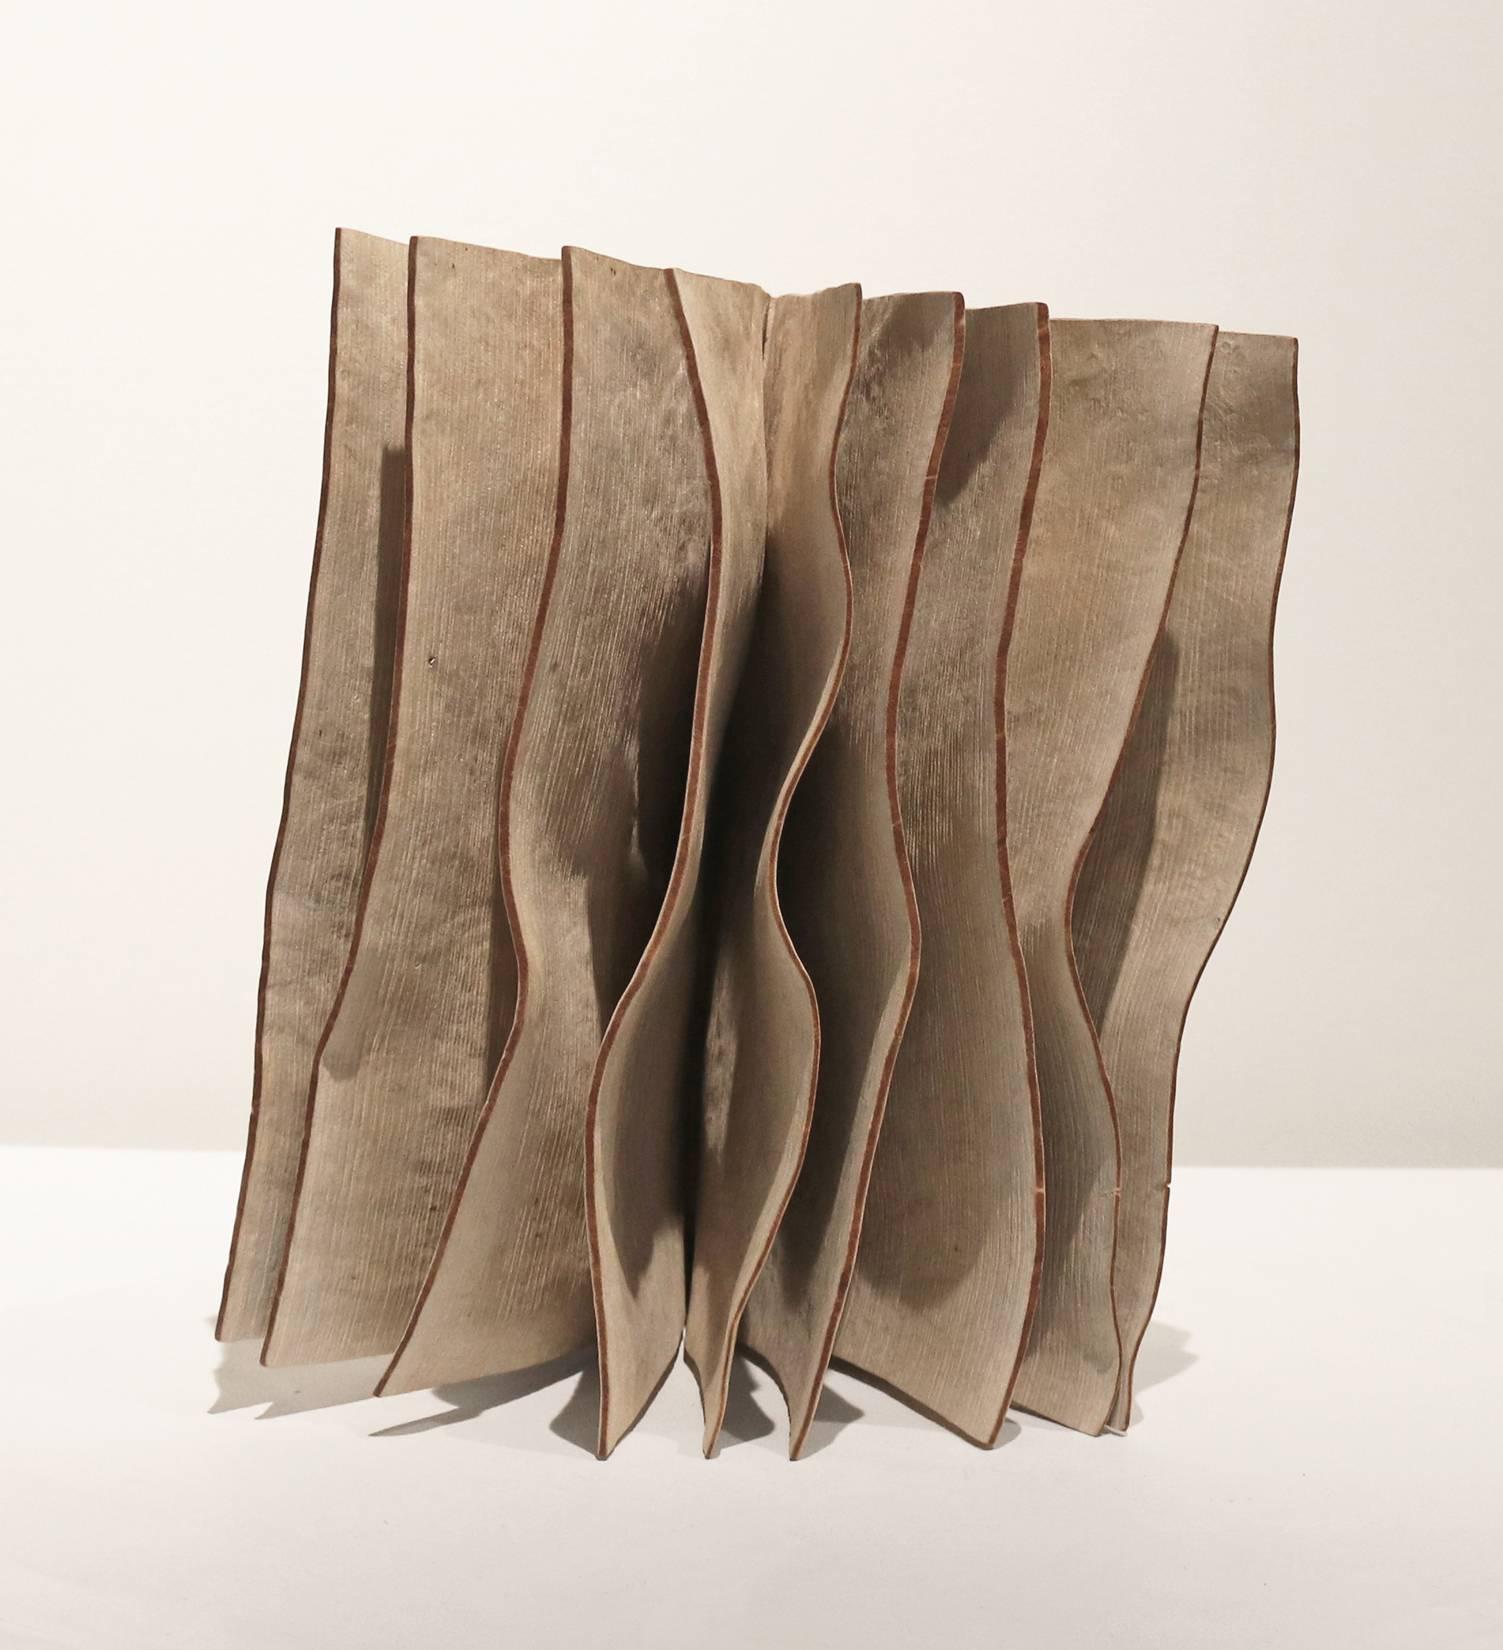 White Book #3 - Sculpture by Christian Burchard